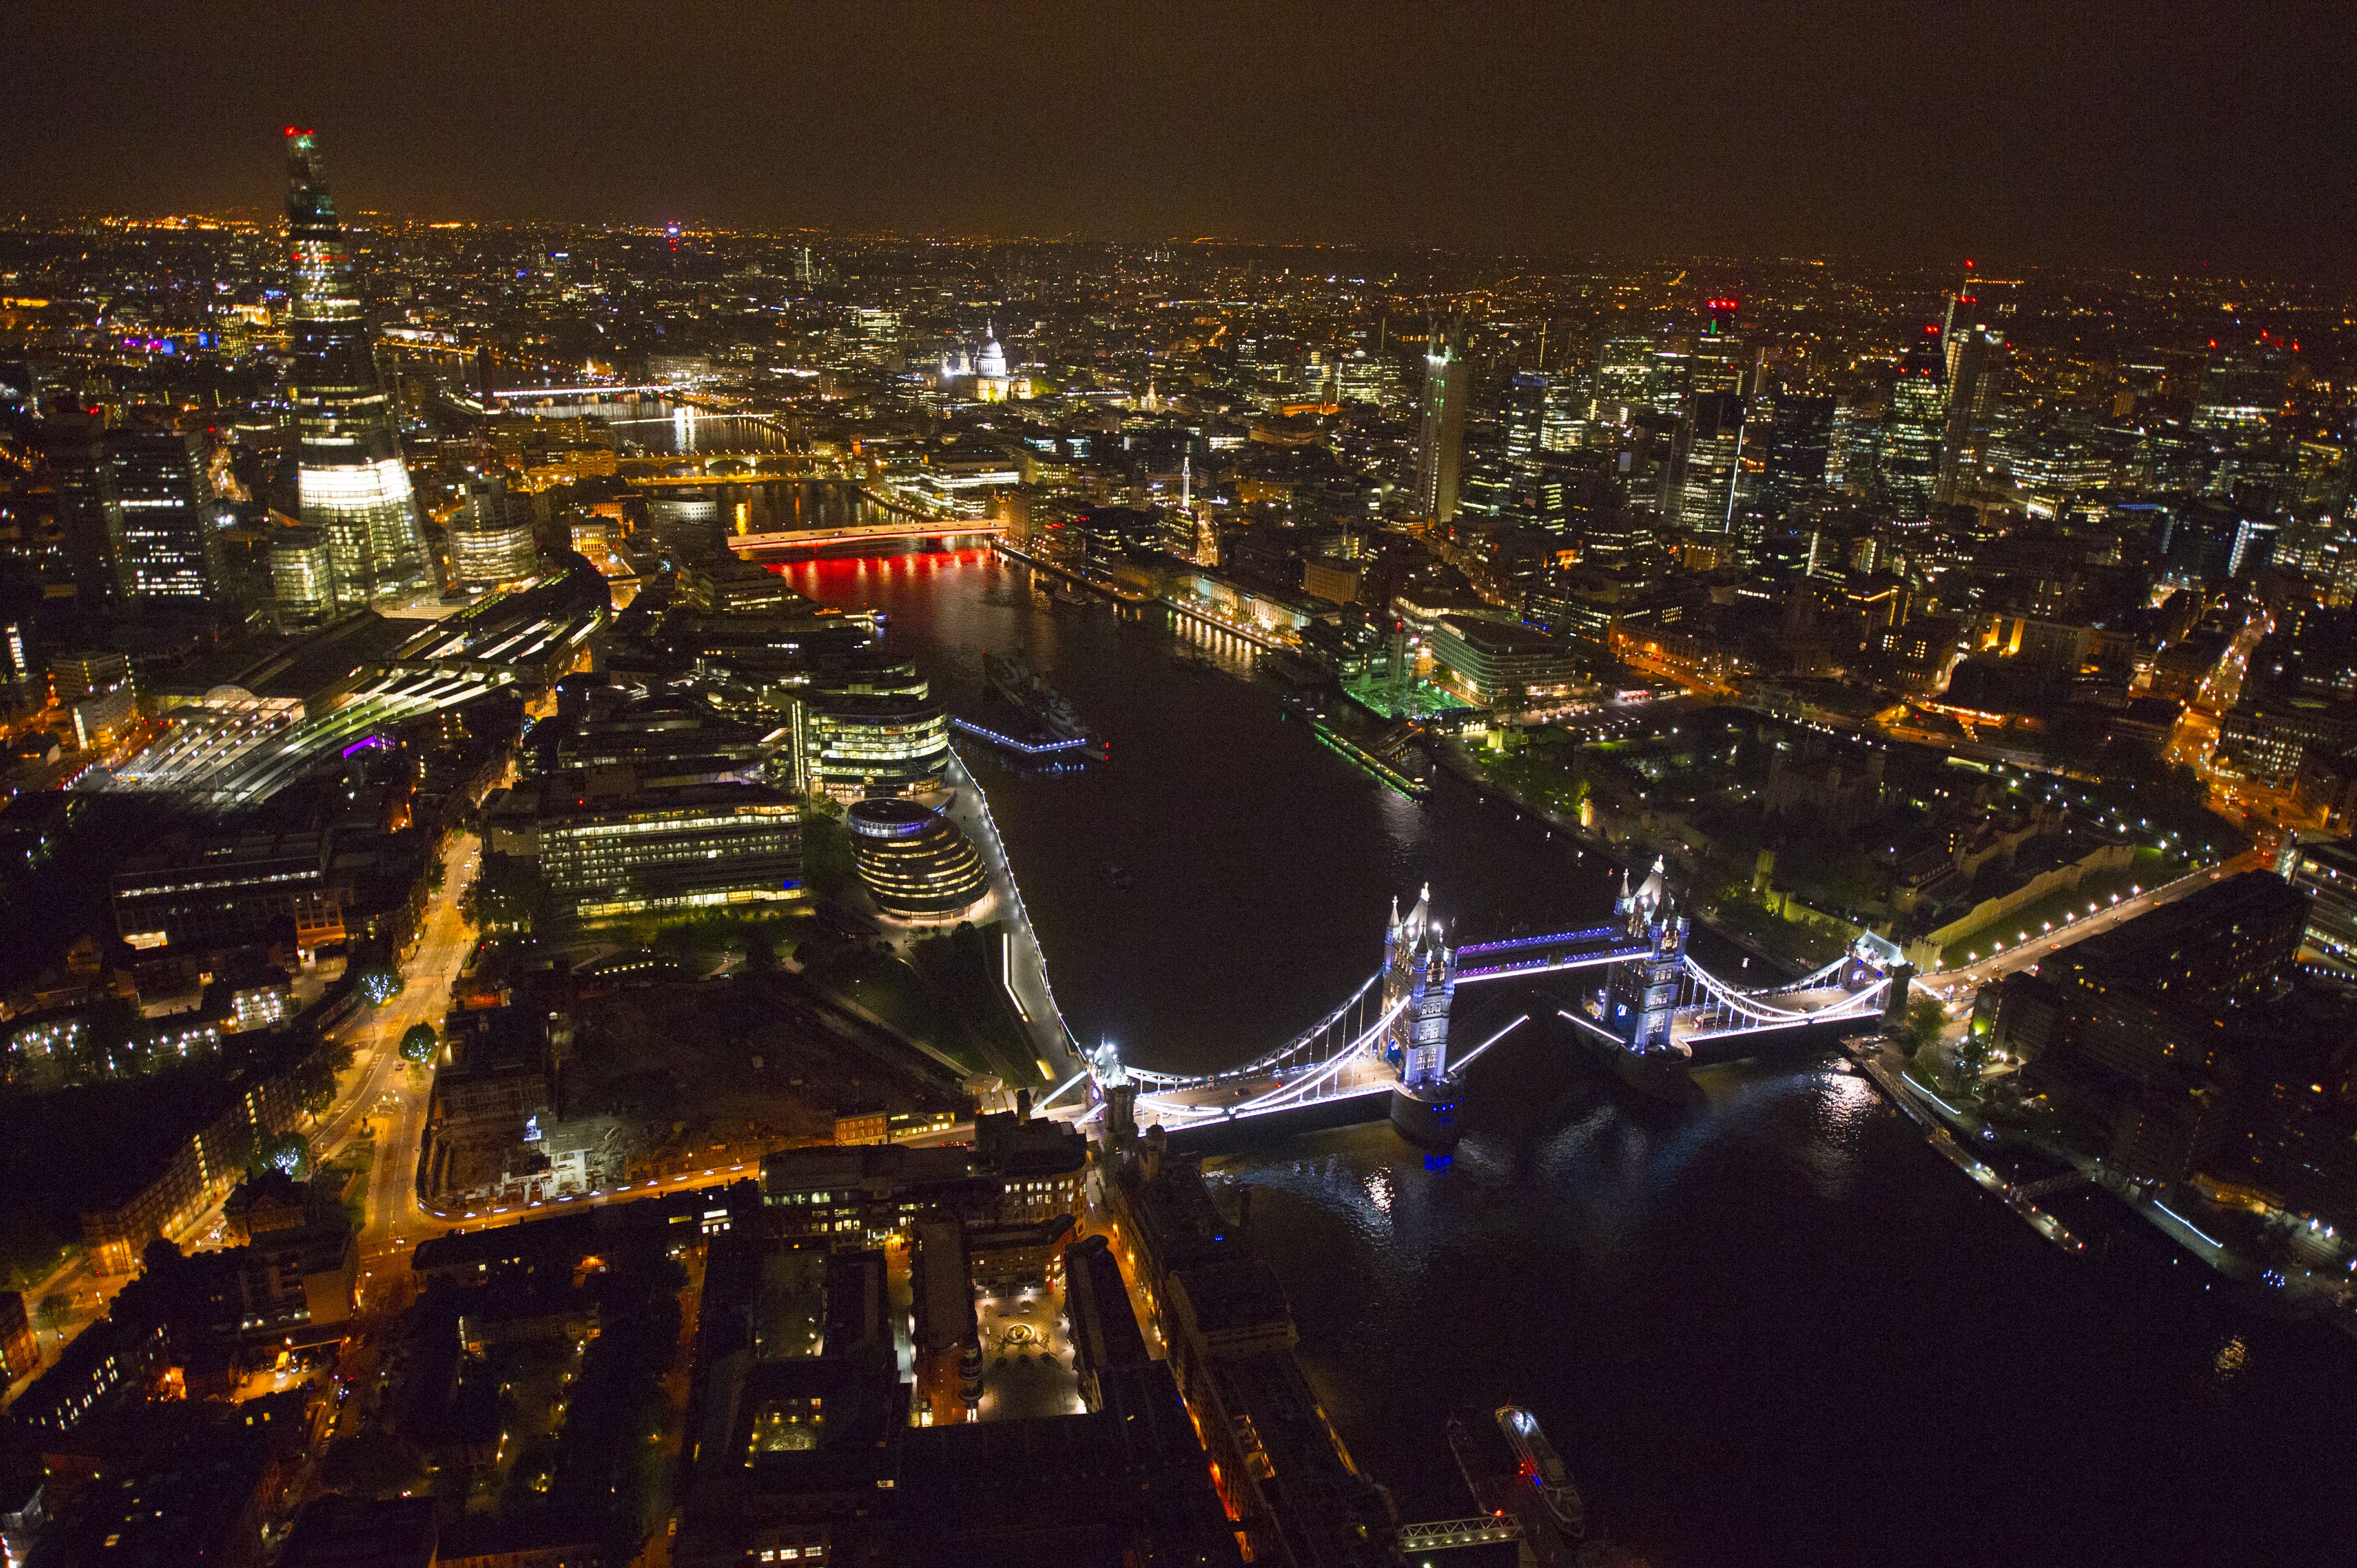 Photo: A Lovely Aerial Photo of London Taken At Night For Your